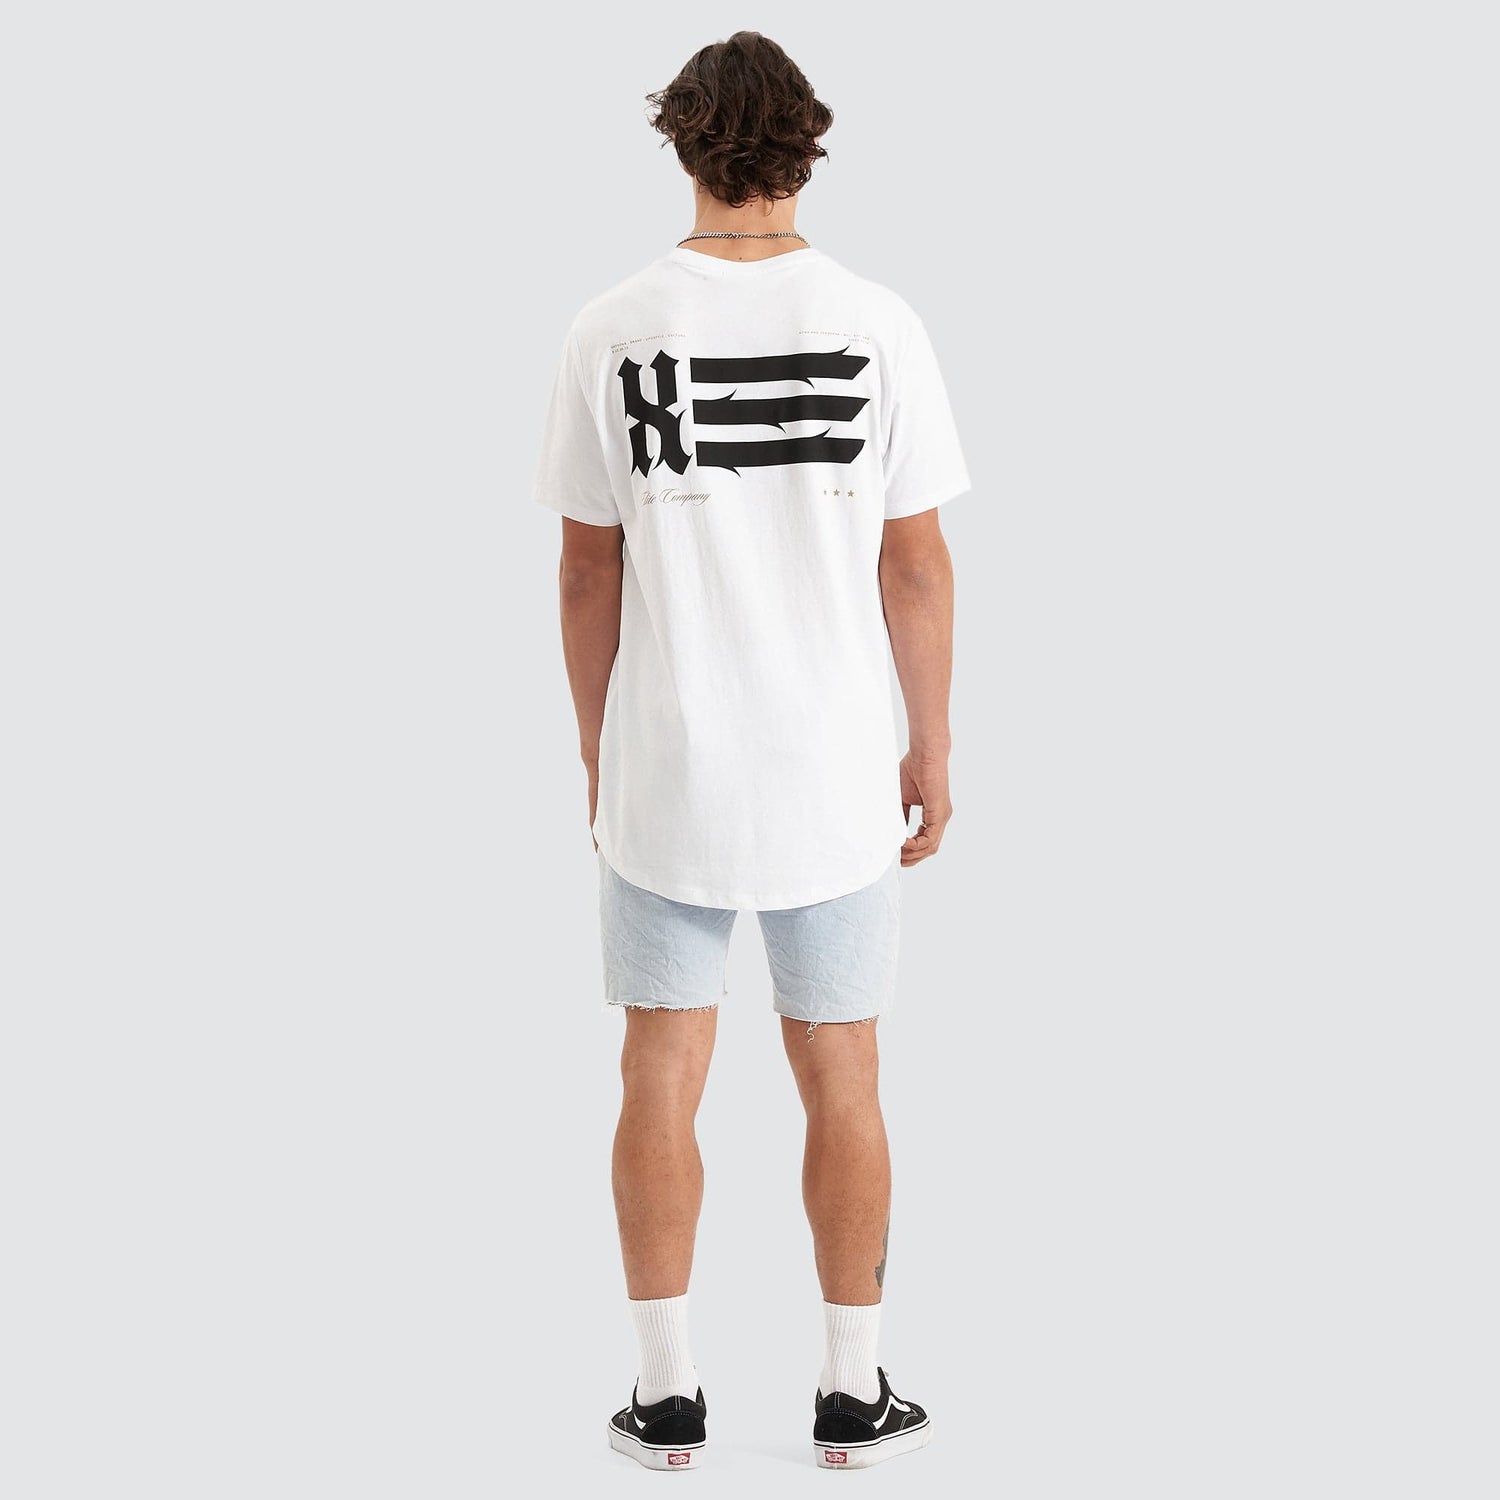 Credence Cape Back T-Shirt White